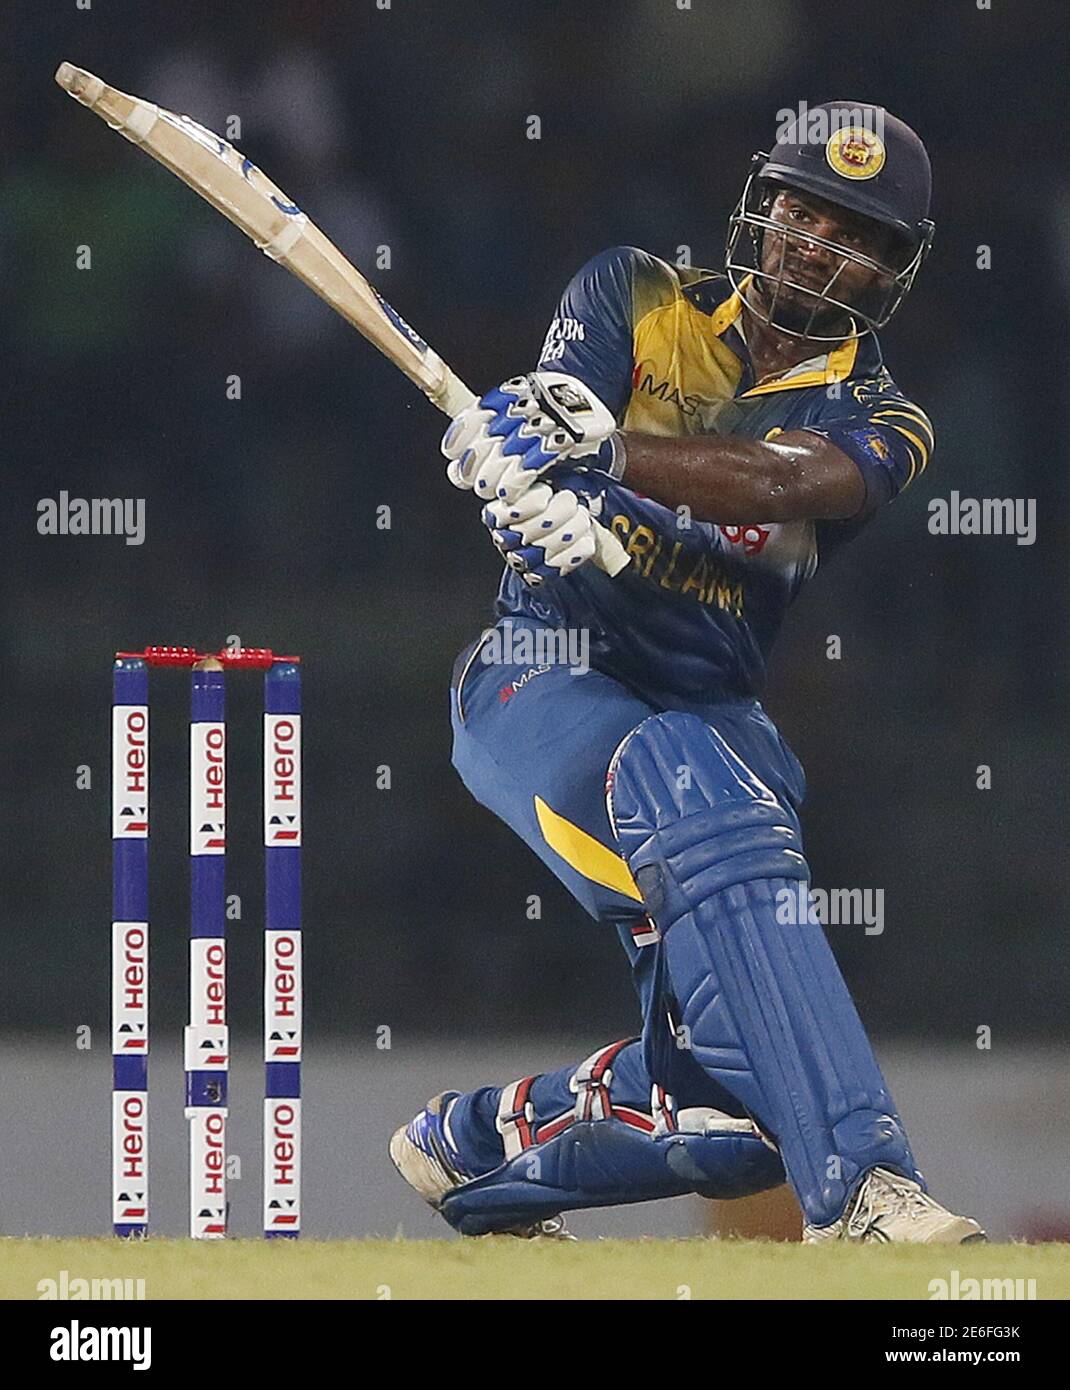 Sri Lanka's Kusal Perera hits a six during the second One Day International cricket match against West Indies in Colombo November 4, 2015. REUTERS/Dinuka Liyanawatte Stock Photo